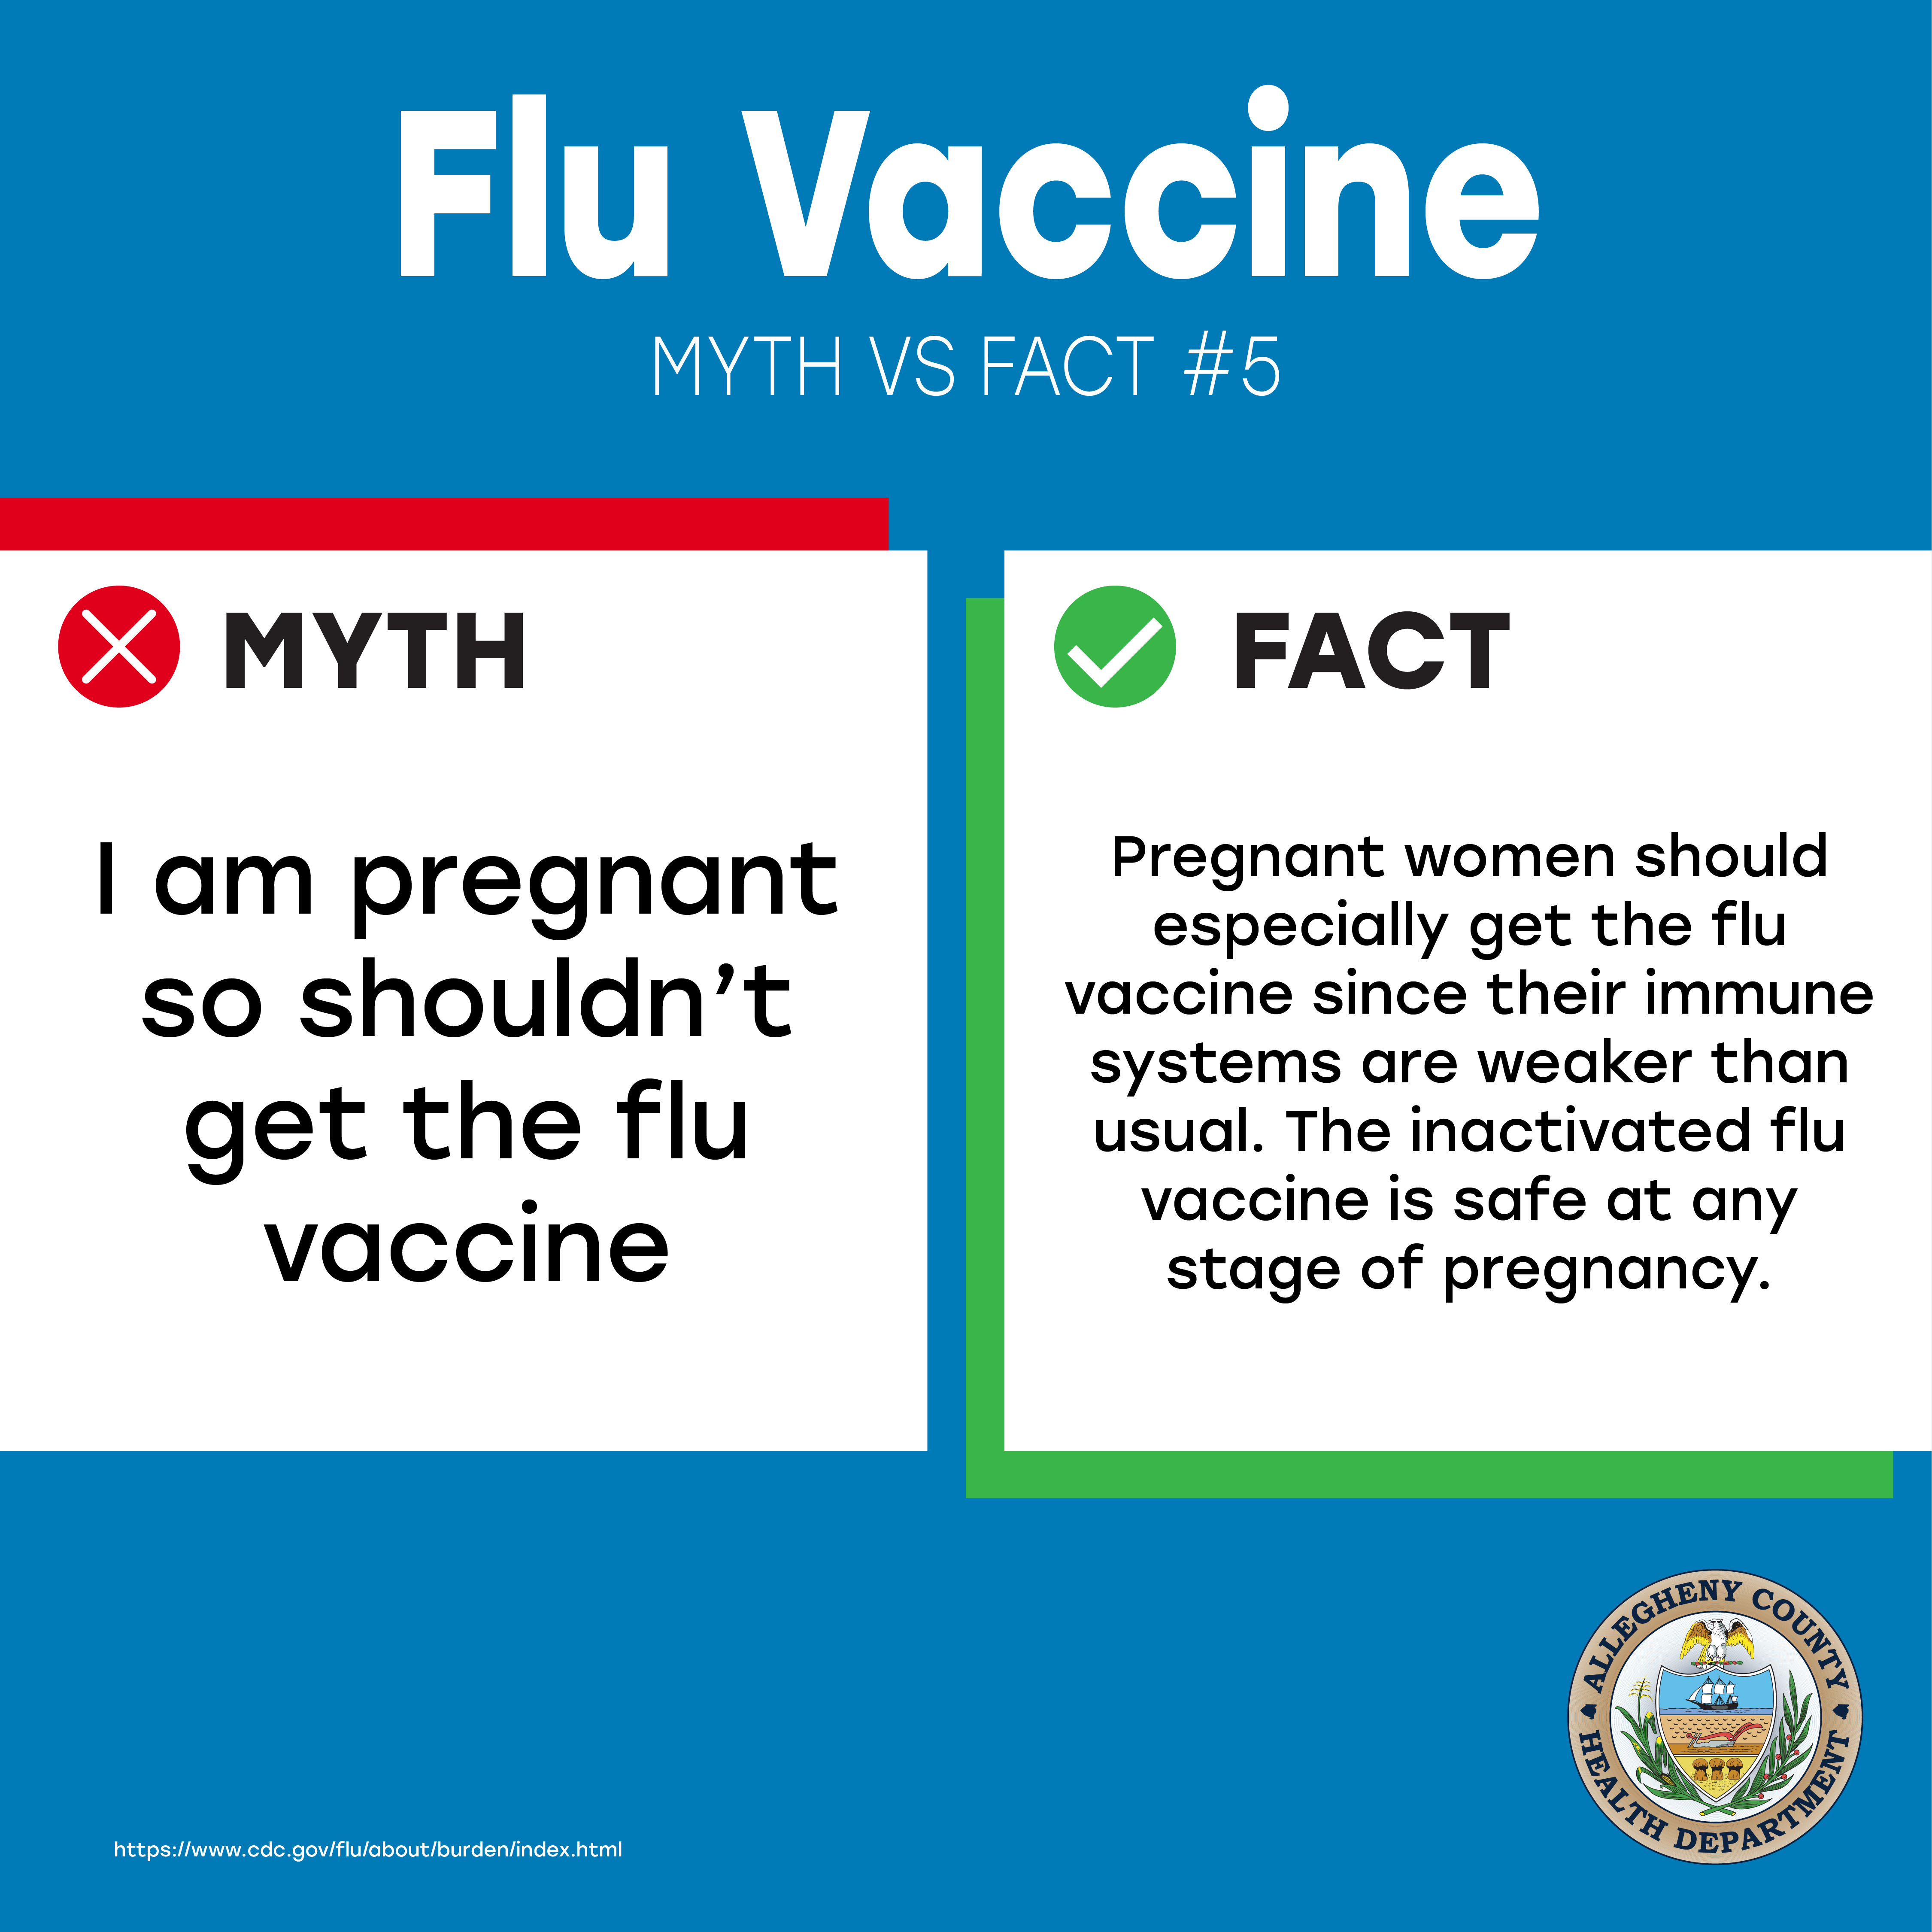 Thumbnail image encouraging pregnant women to get vaccinated against the flu due to their weakened immune systems. The graphic also explains that the inactivated flu vaccine is safe during pregnancy. The Allegheny County Health Department logo is on the bottom right and the link to the CDC flu information is on the bottom left.  